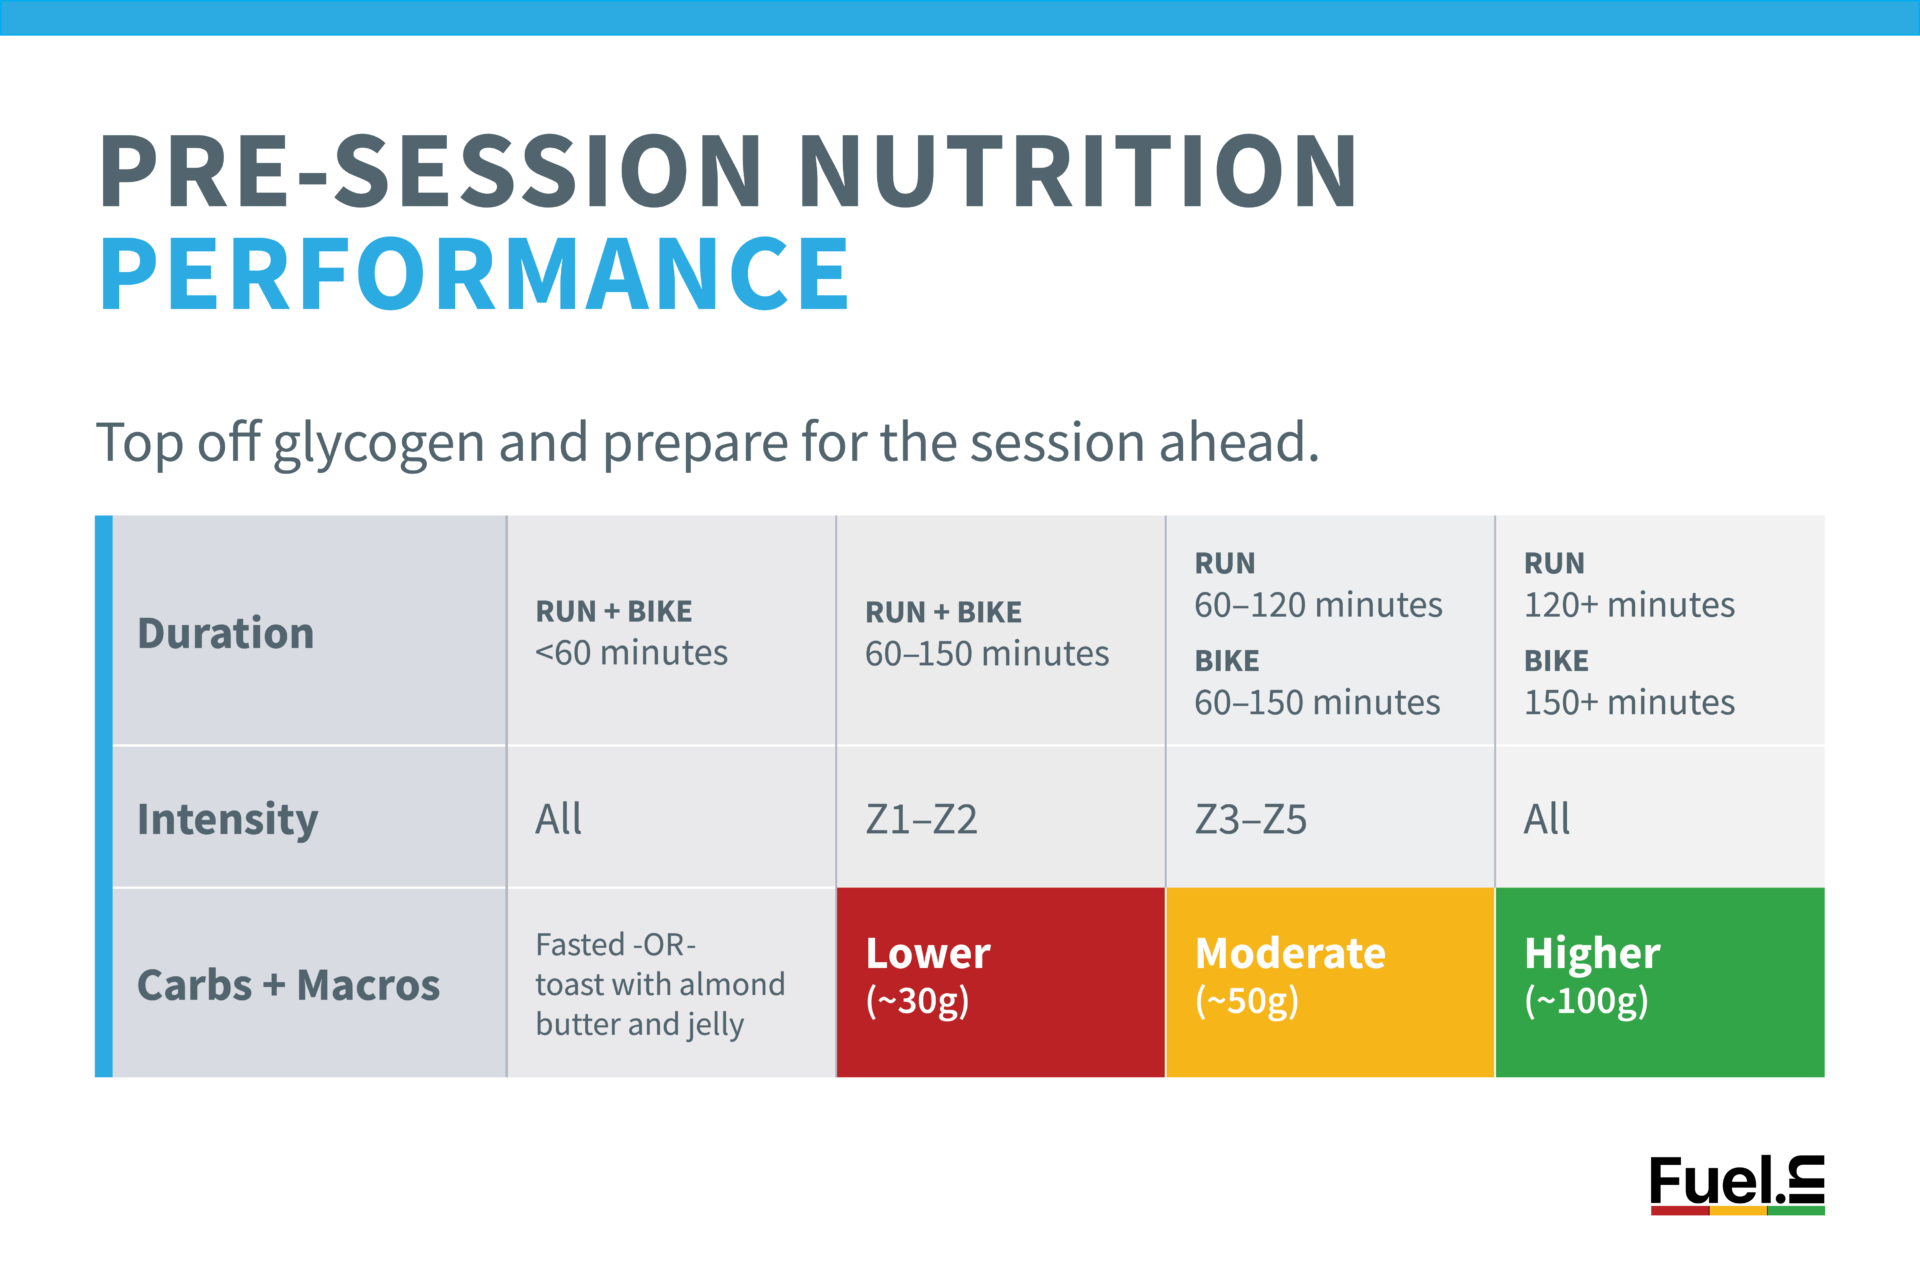 Example of pre-session nutrition plan from Fuelin